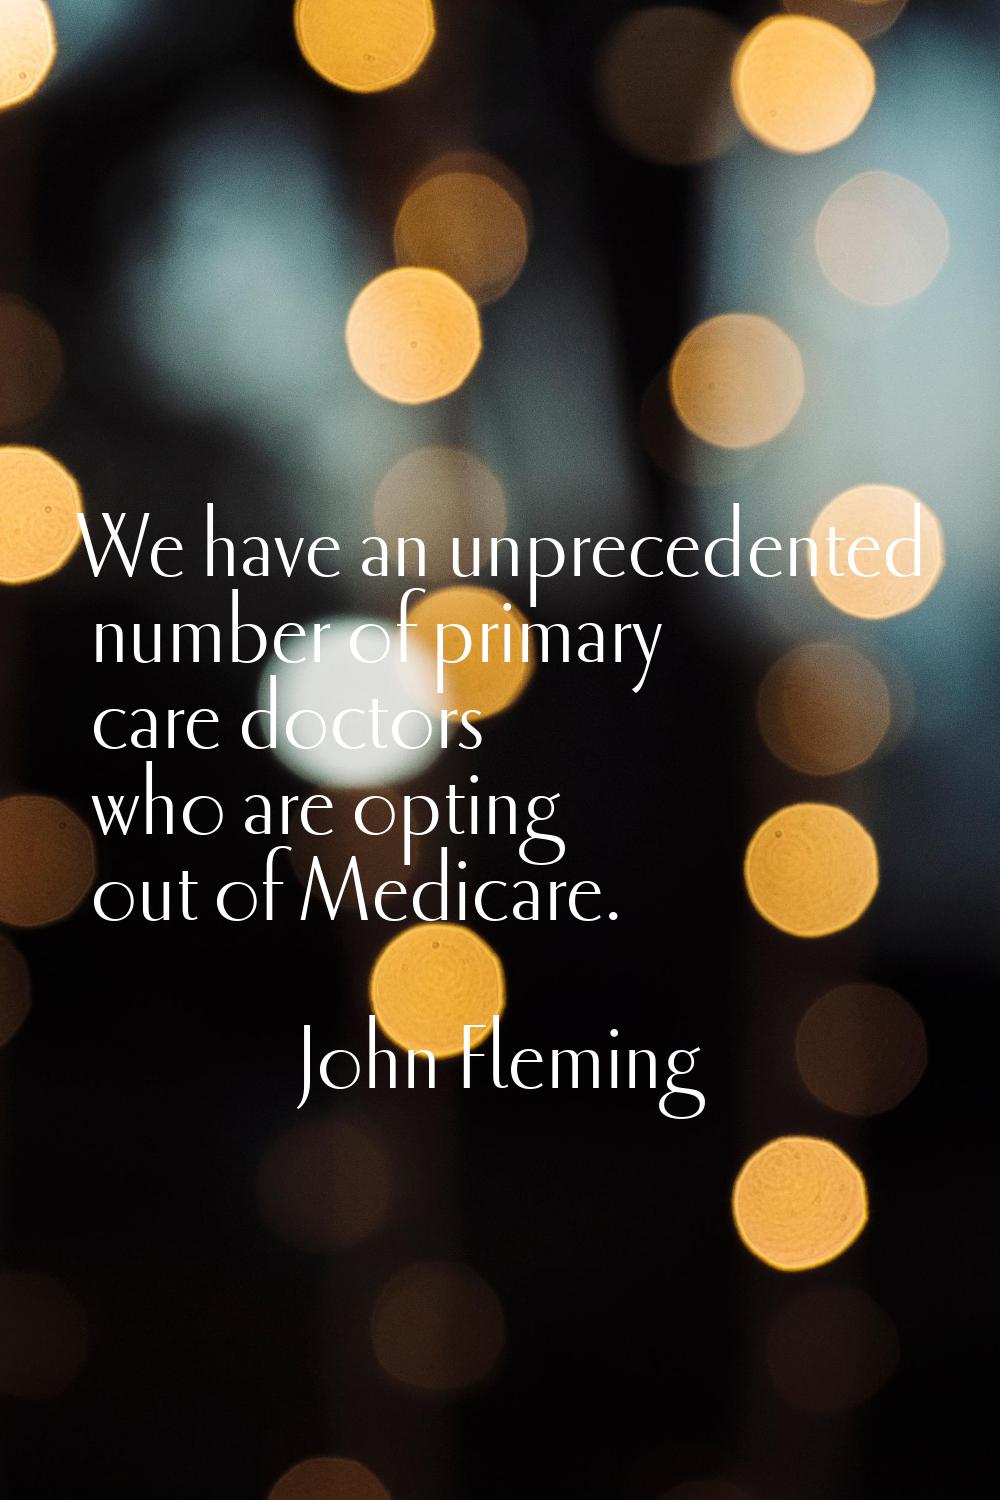 We have an unprecedented number of primary care doctors who are opting out of Medicare.